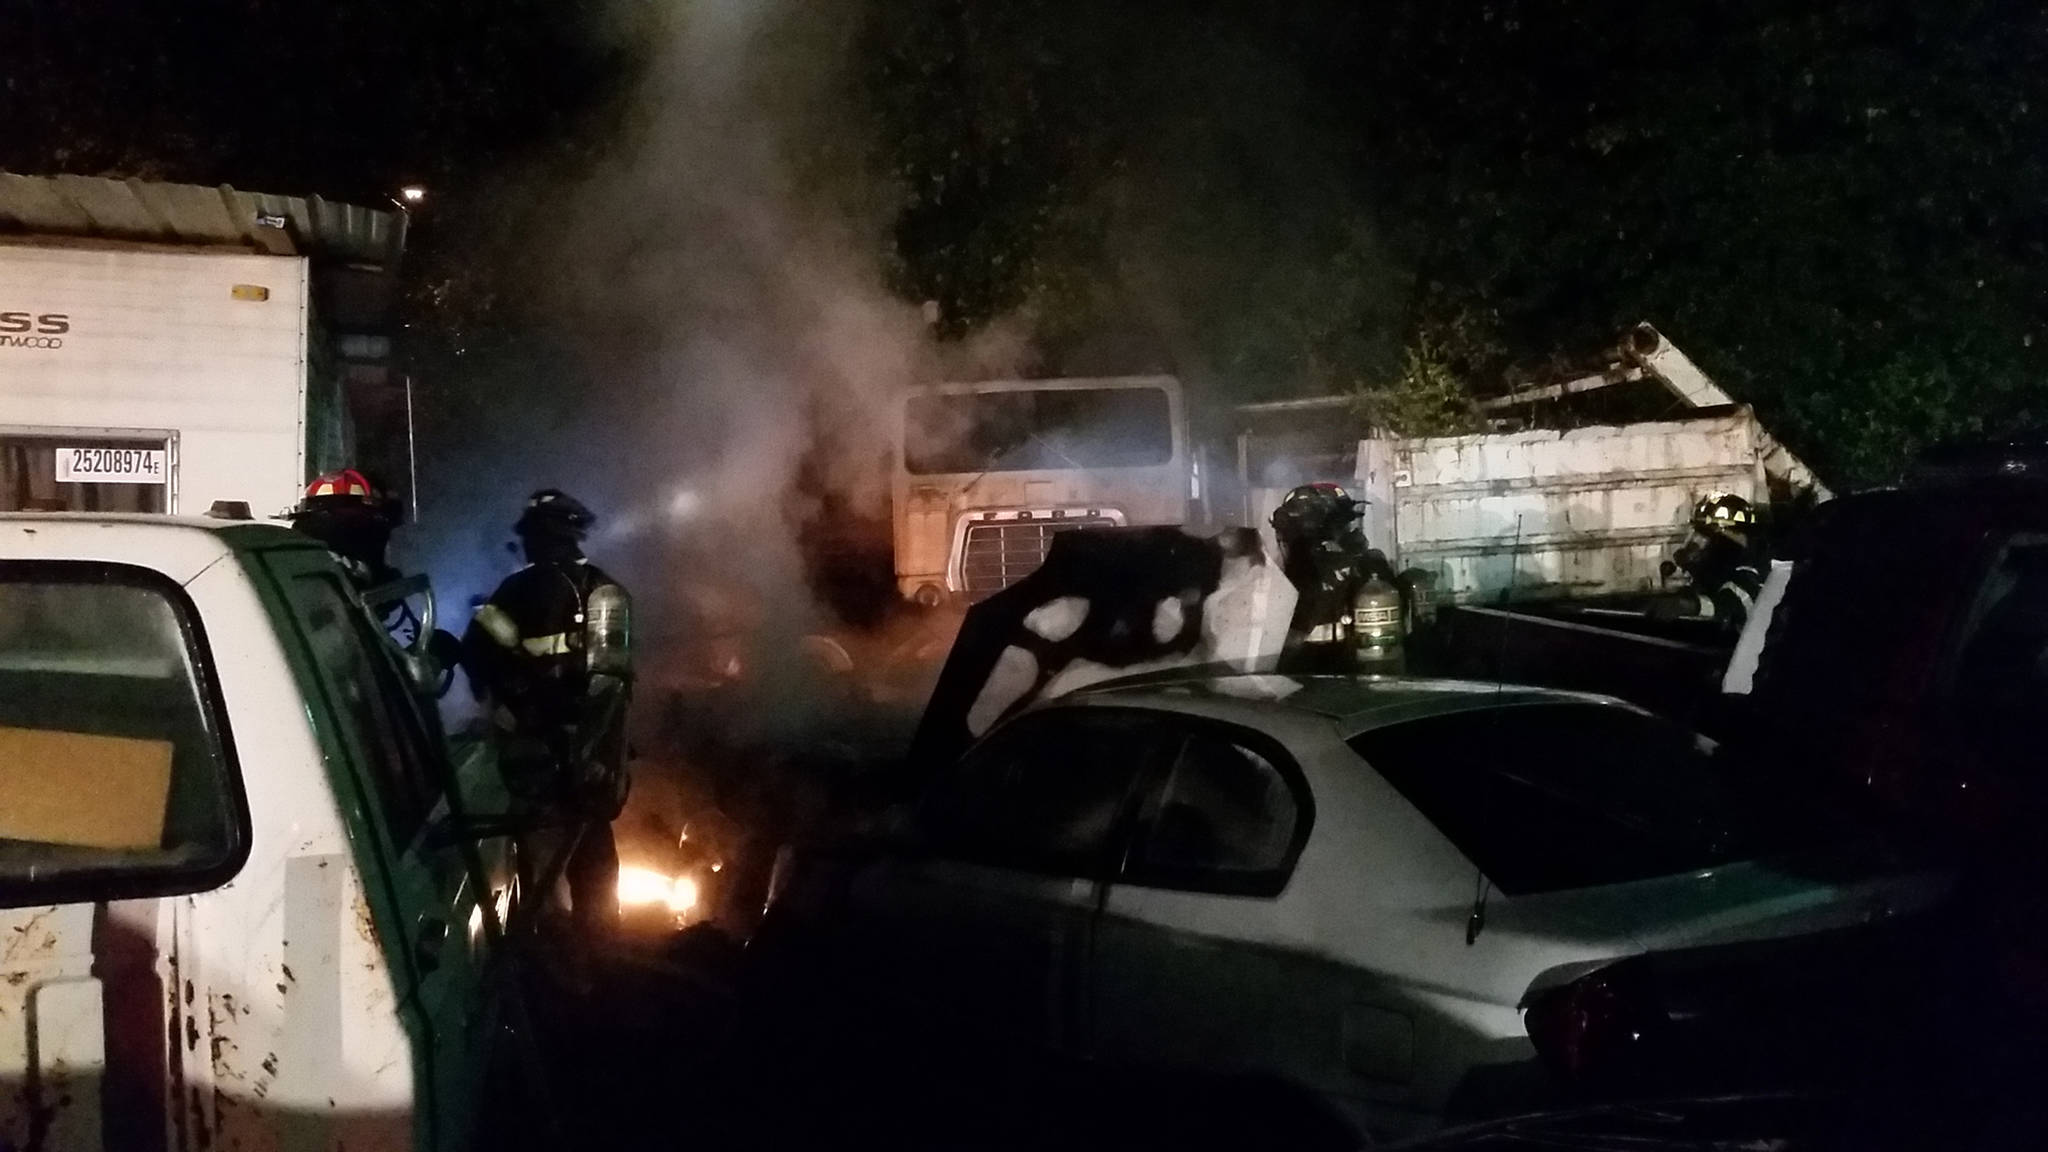 Despite difficulty in getting to the middle of the car lot, Puget Sound Fire crews were able to quickly put water on the five vehicles that were burning early Saturday morning. COURTESY PHOTO, Puget Sound Regional Fire Authority